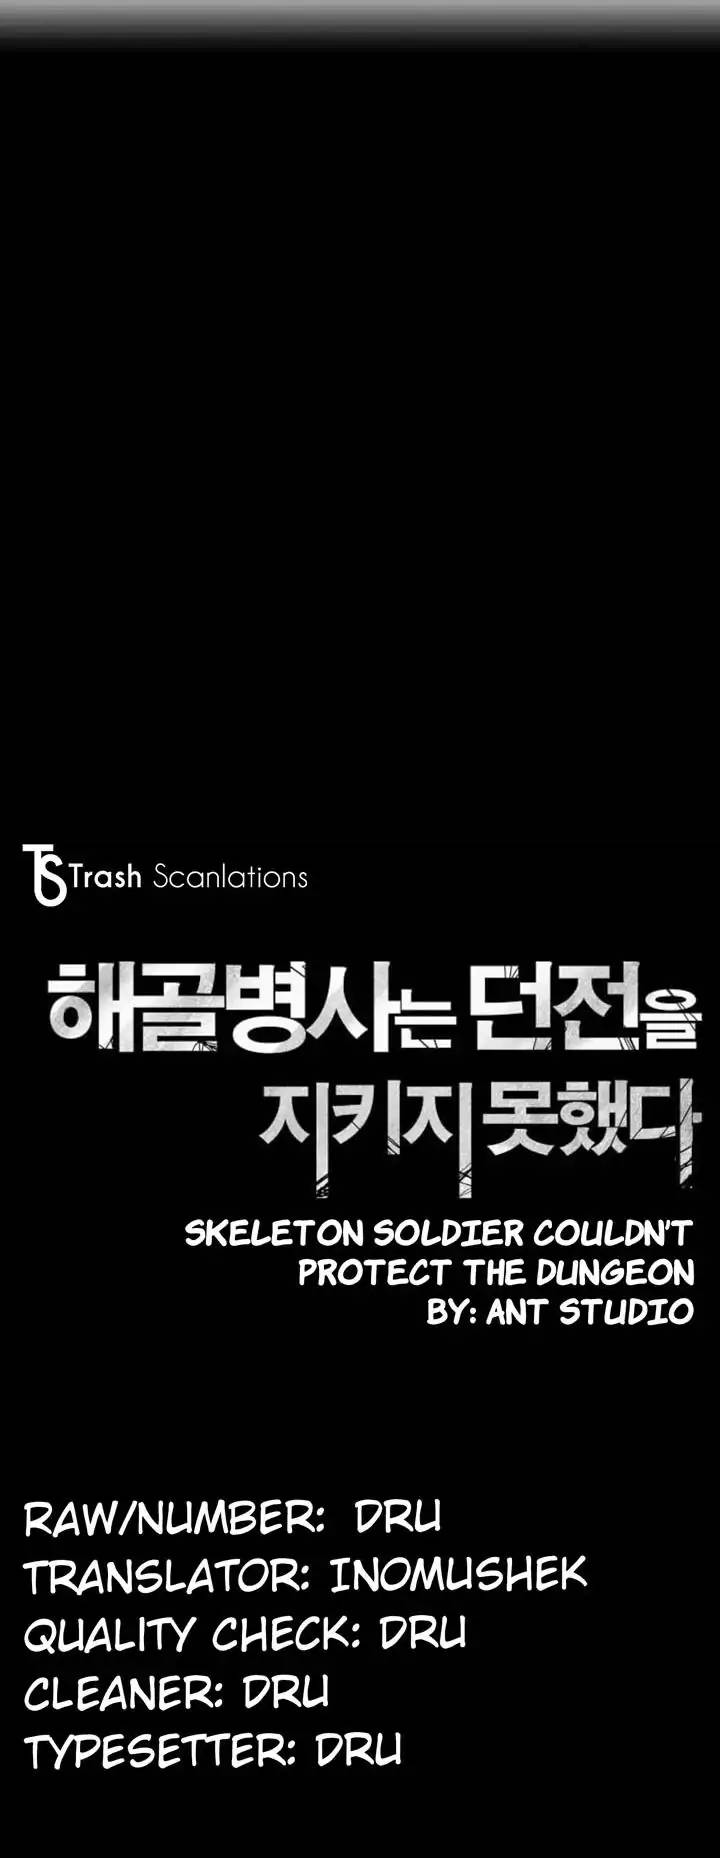 skeleton_soldier_couldnt_protect_the_dungeon_5_5